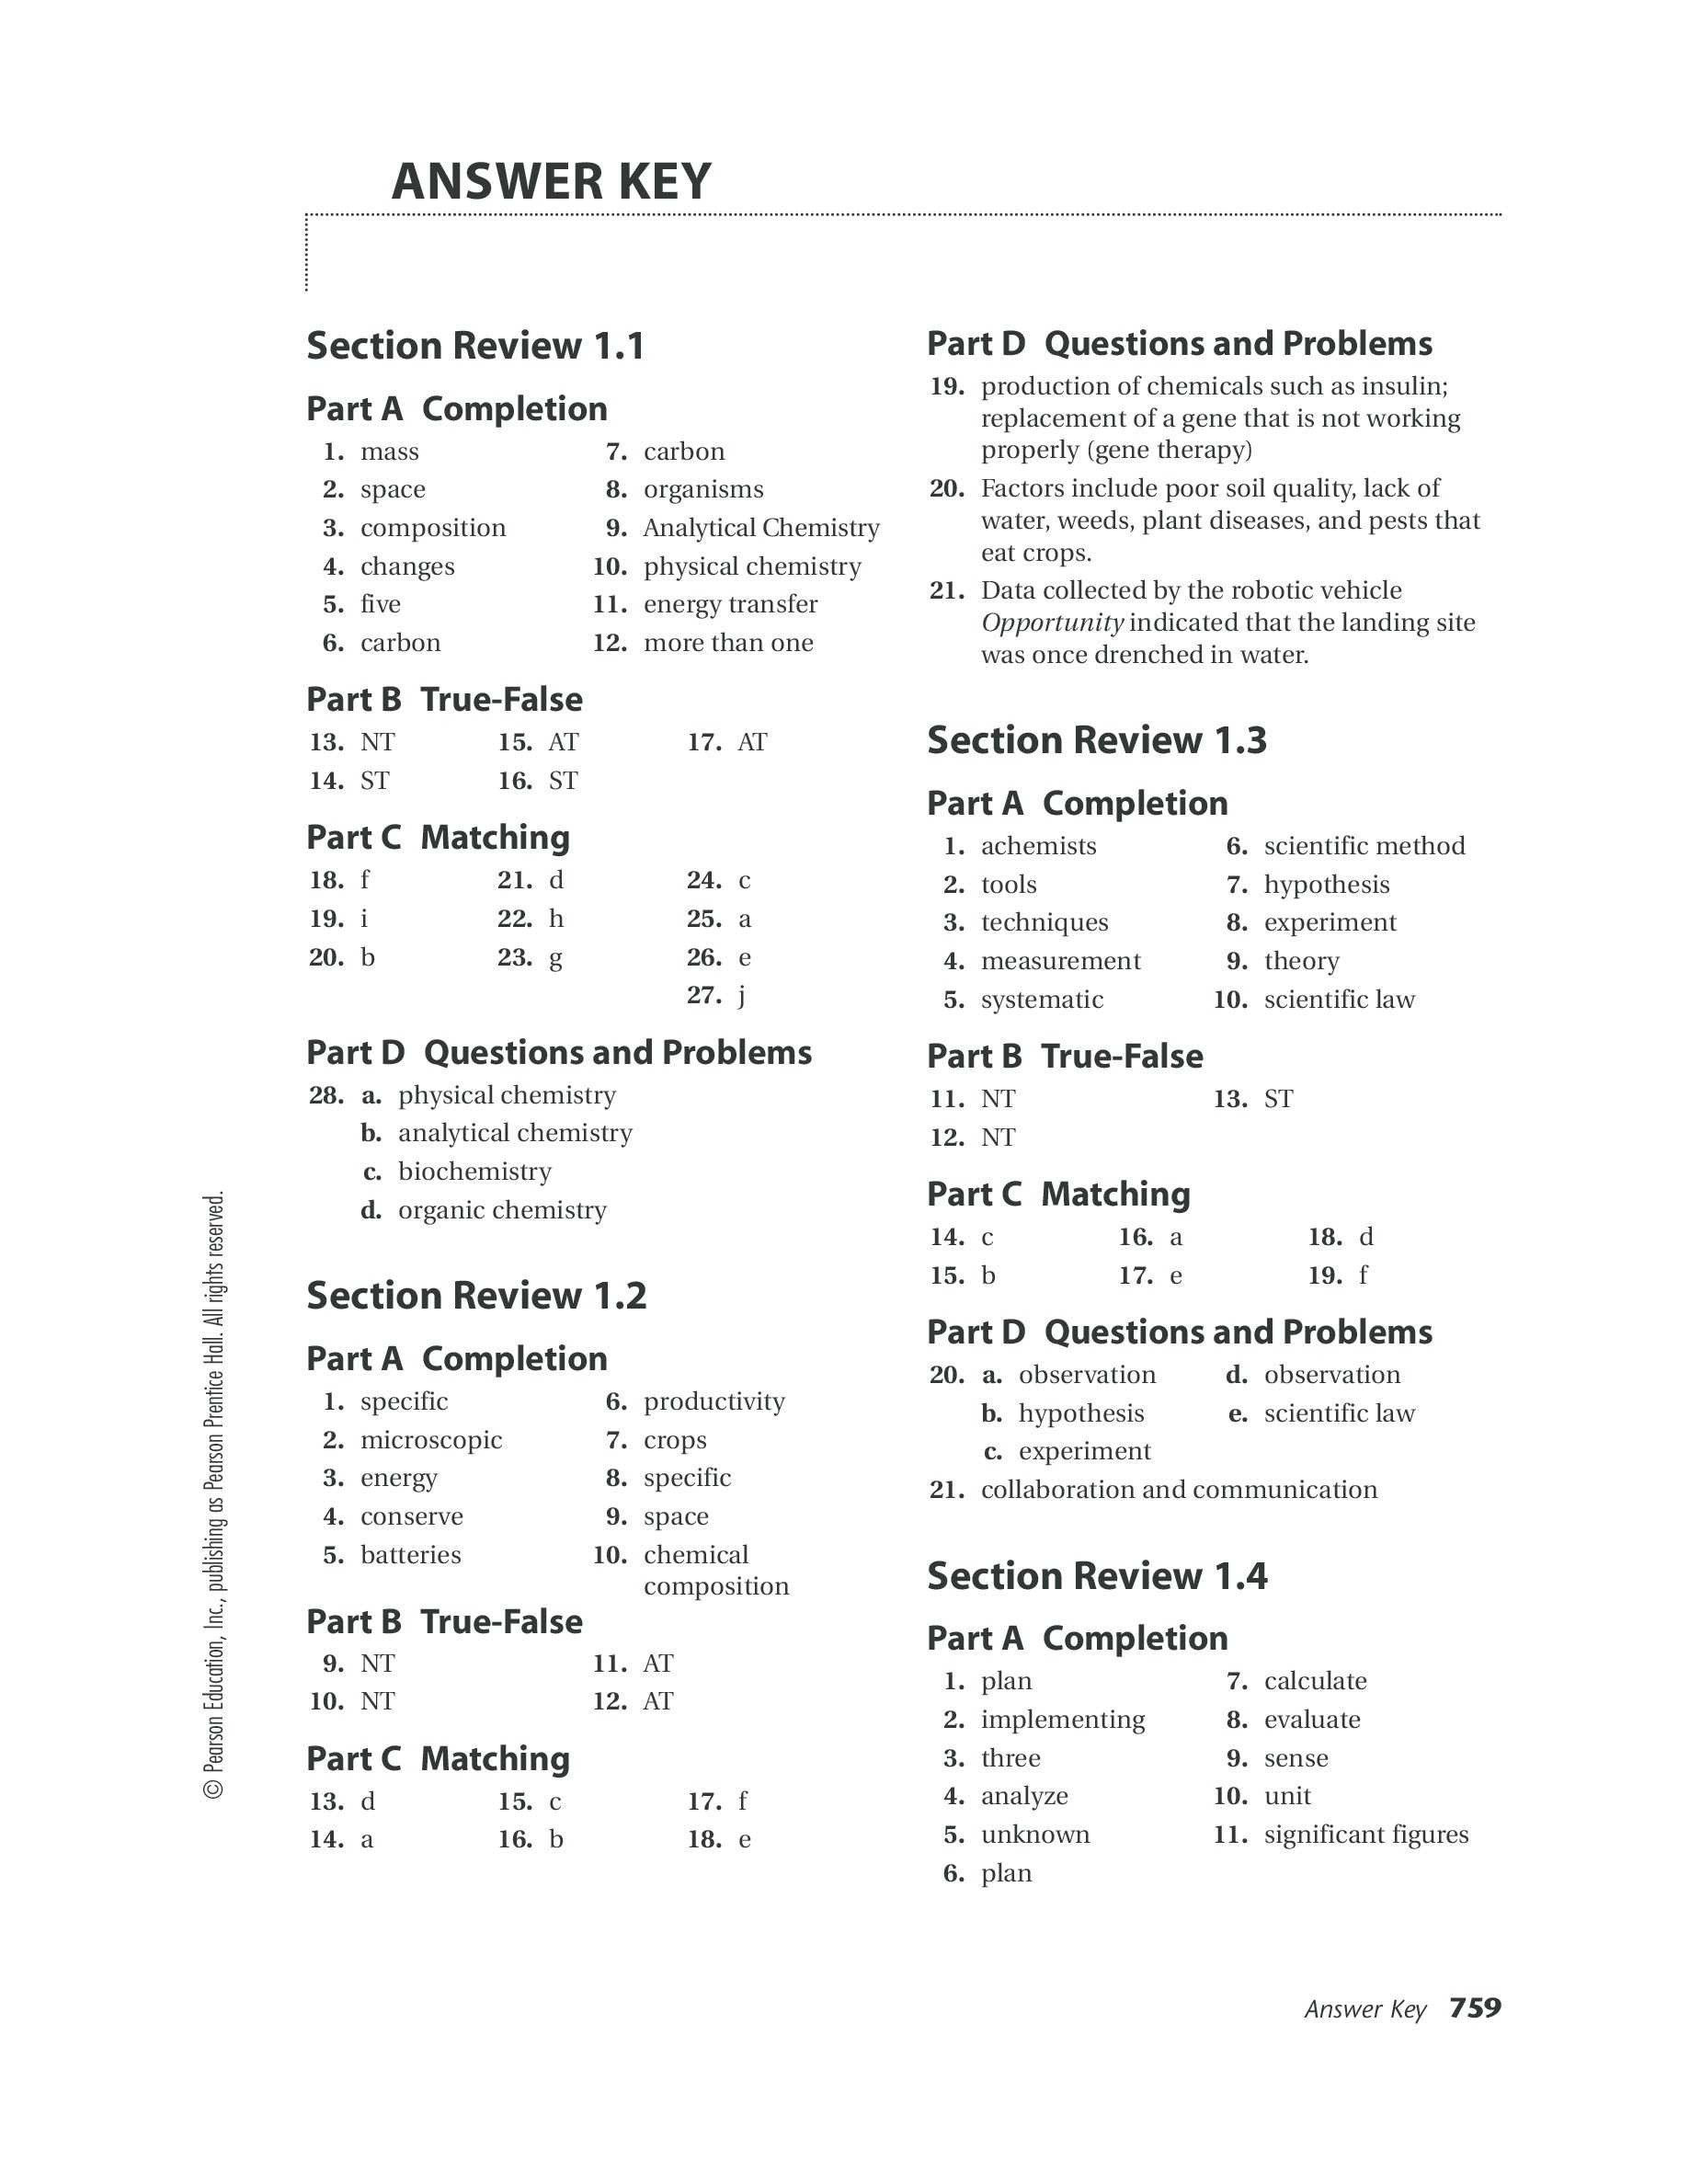 Worksheet Periodic Trends Answers Worksheet Periodic Trends Answers Key the Periodic Table and